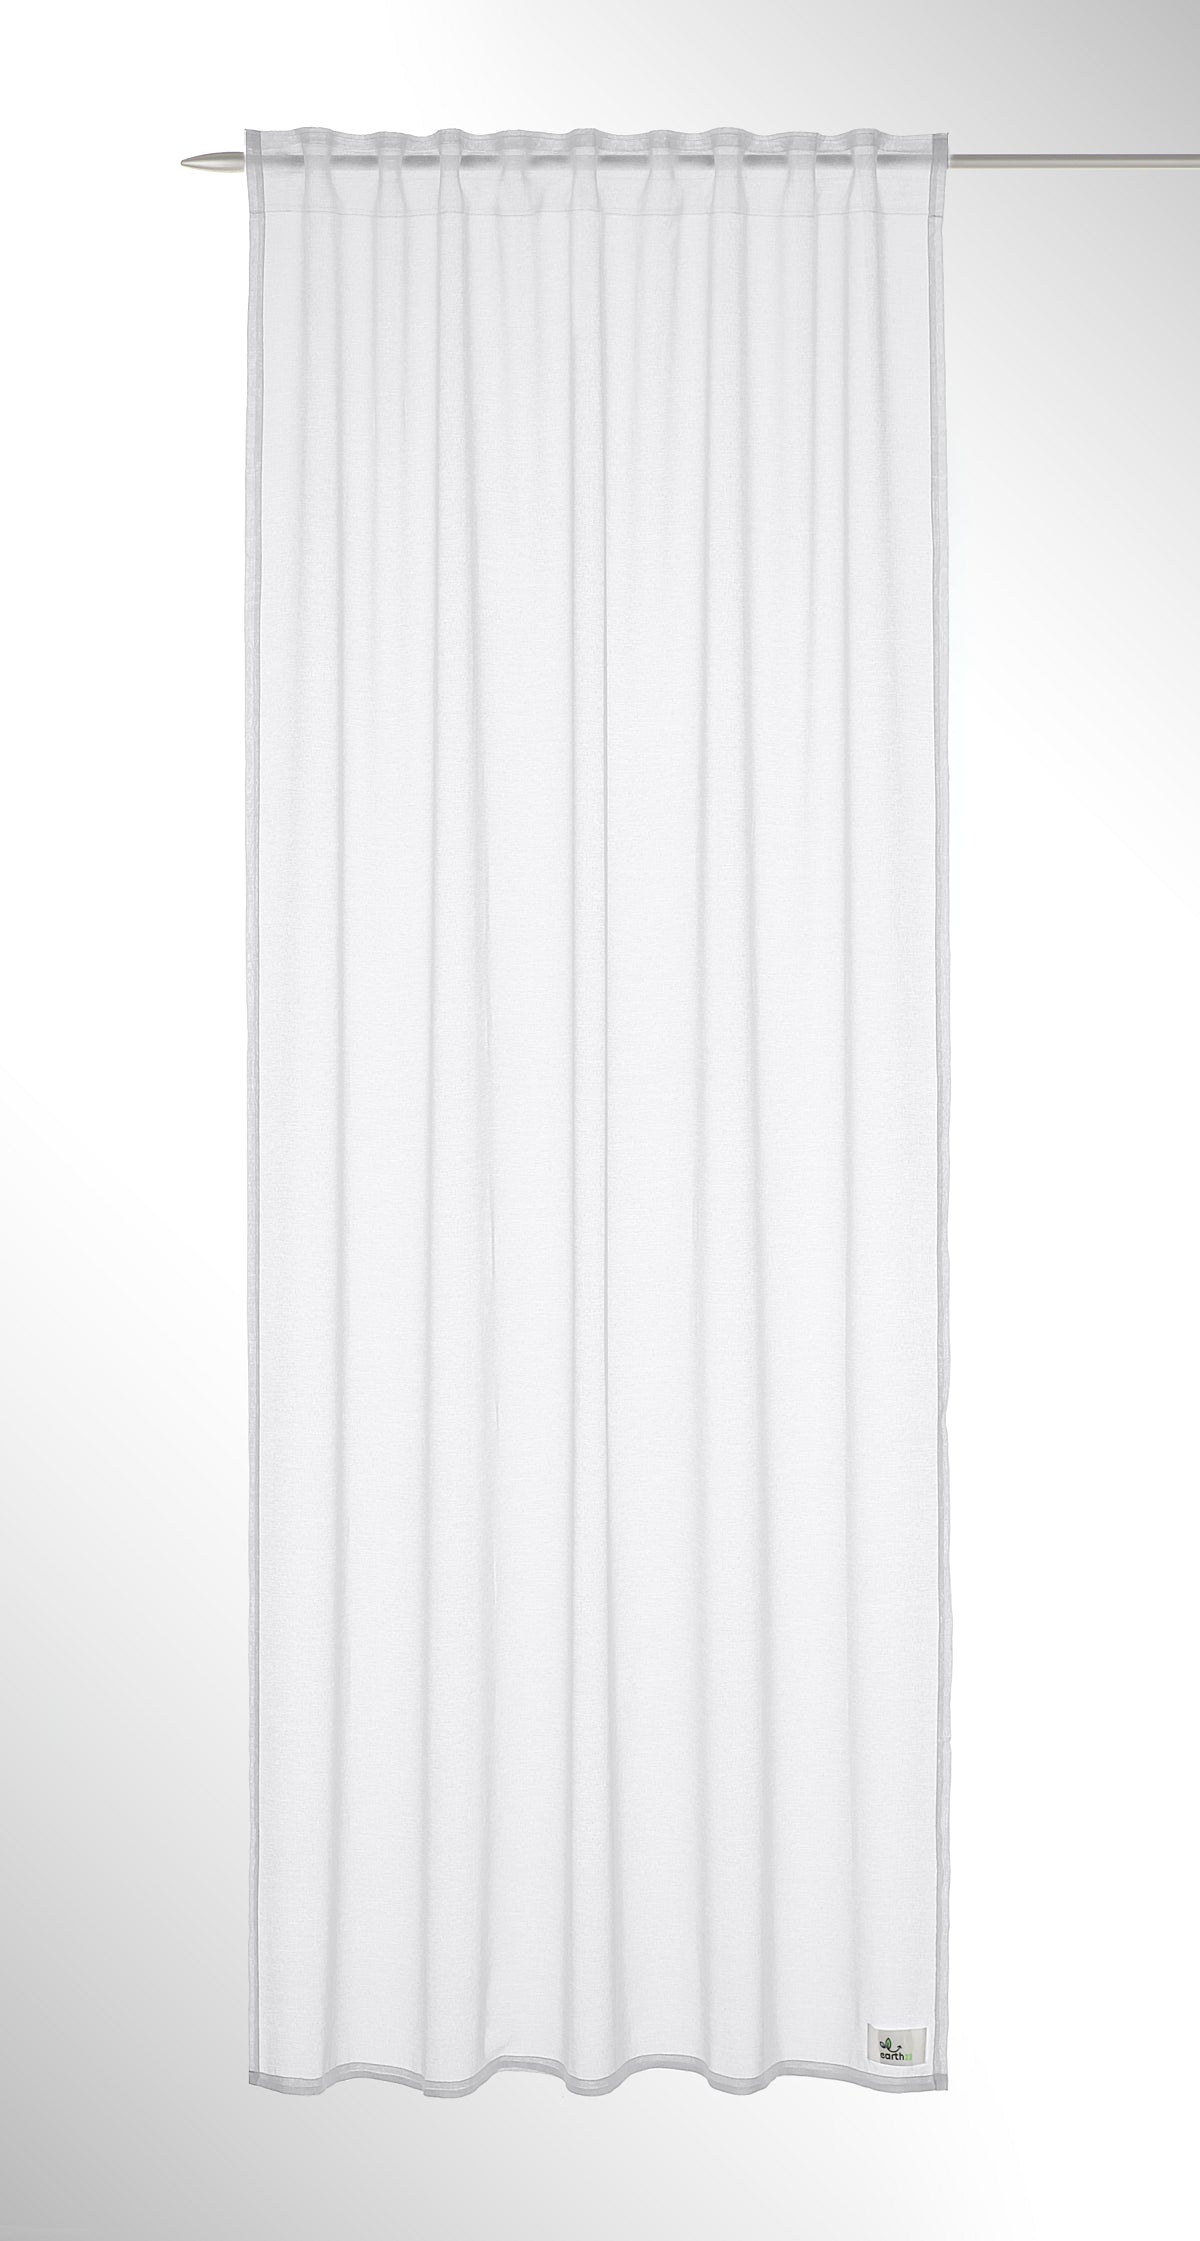 Day curtain white Sowilo